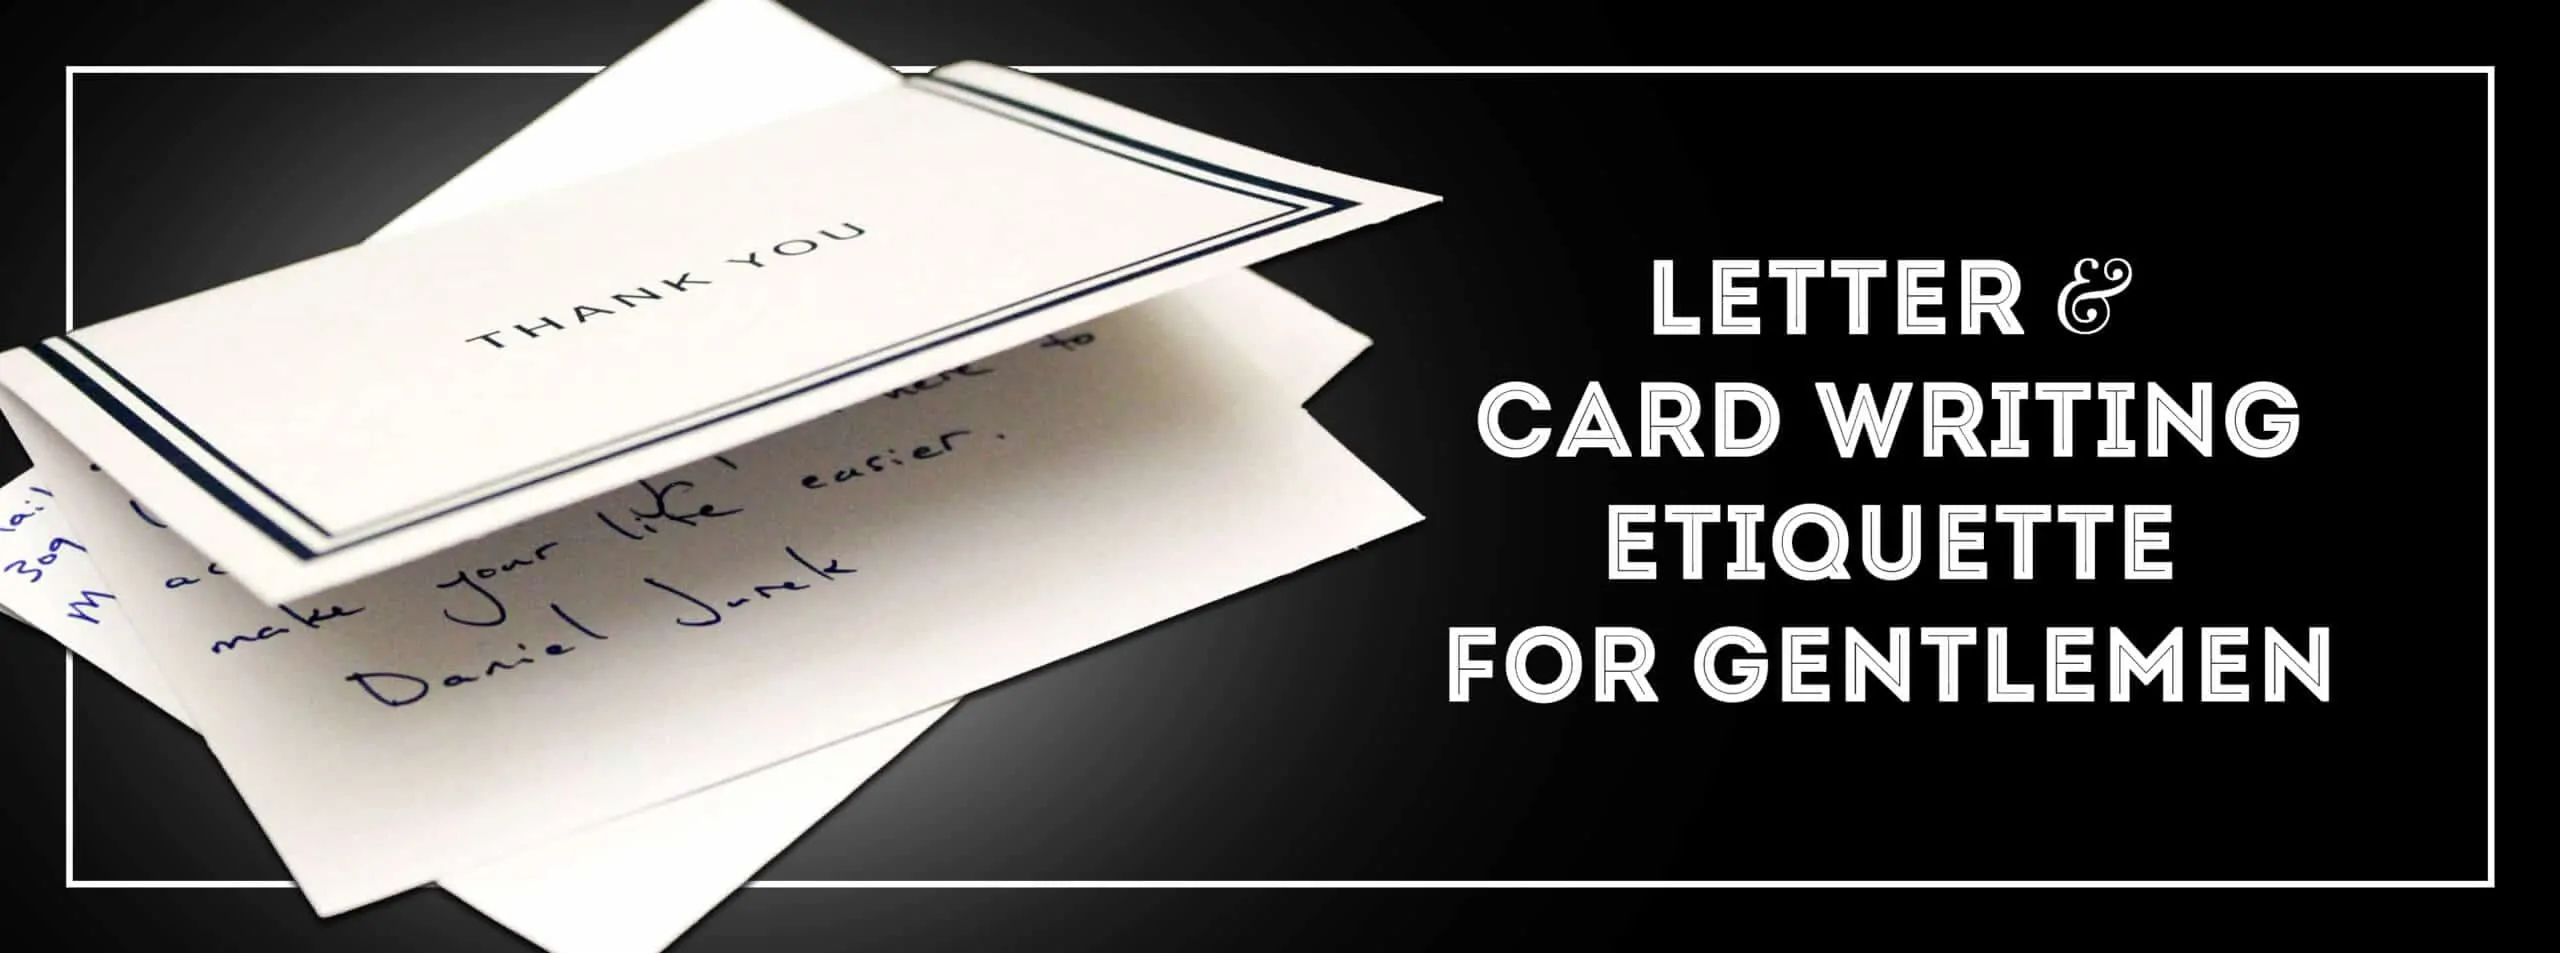 card writing etiquette 3870x1440 scaled